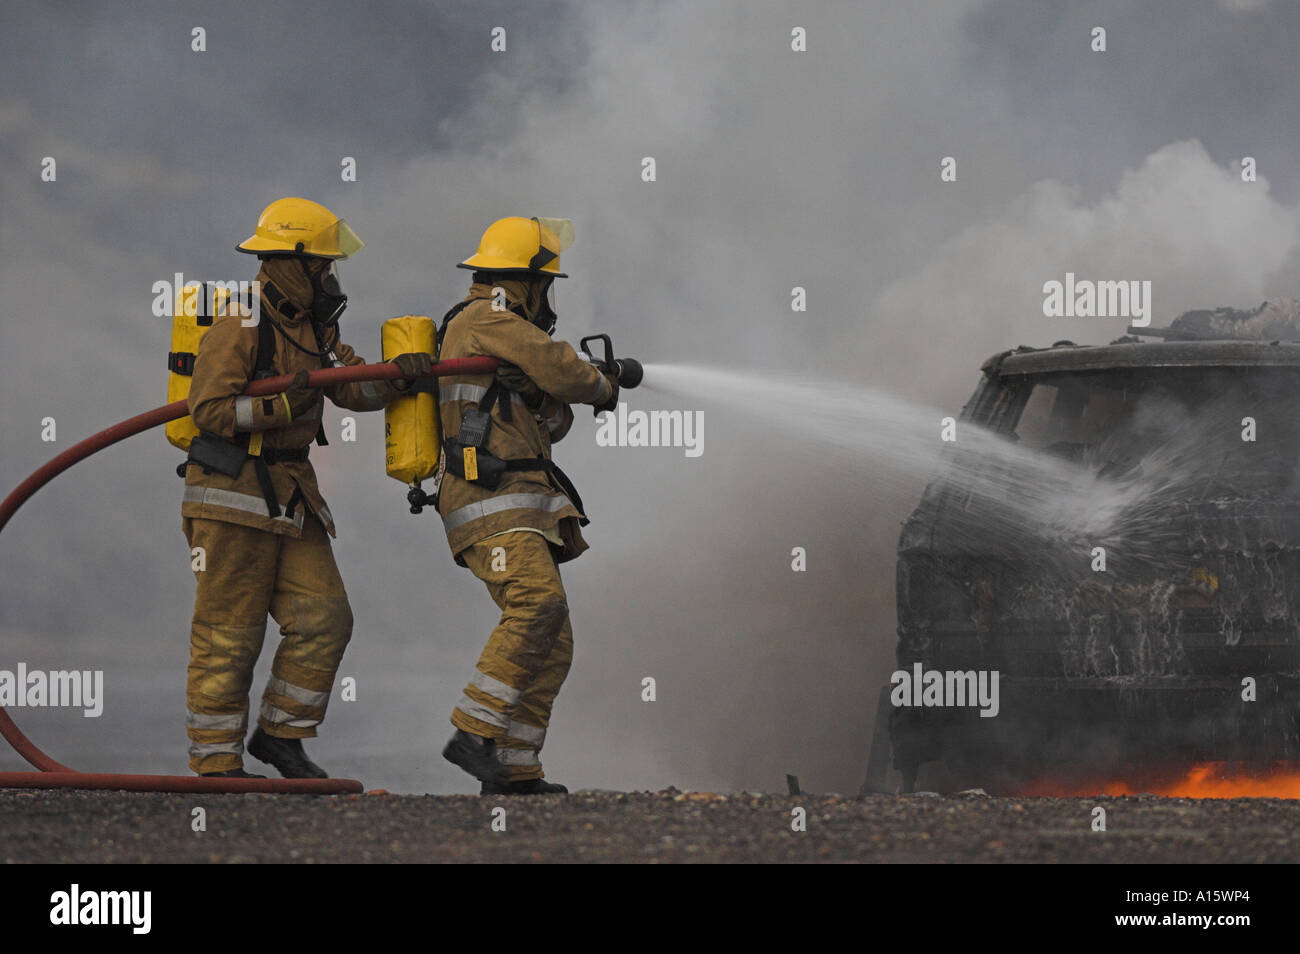 Two firefighters tackling a burning car. Stock Photo